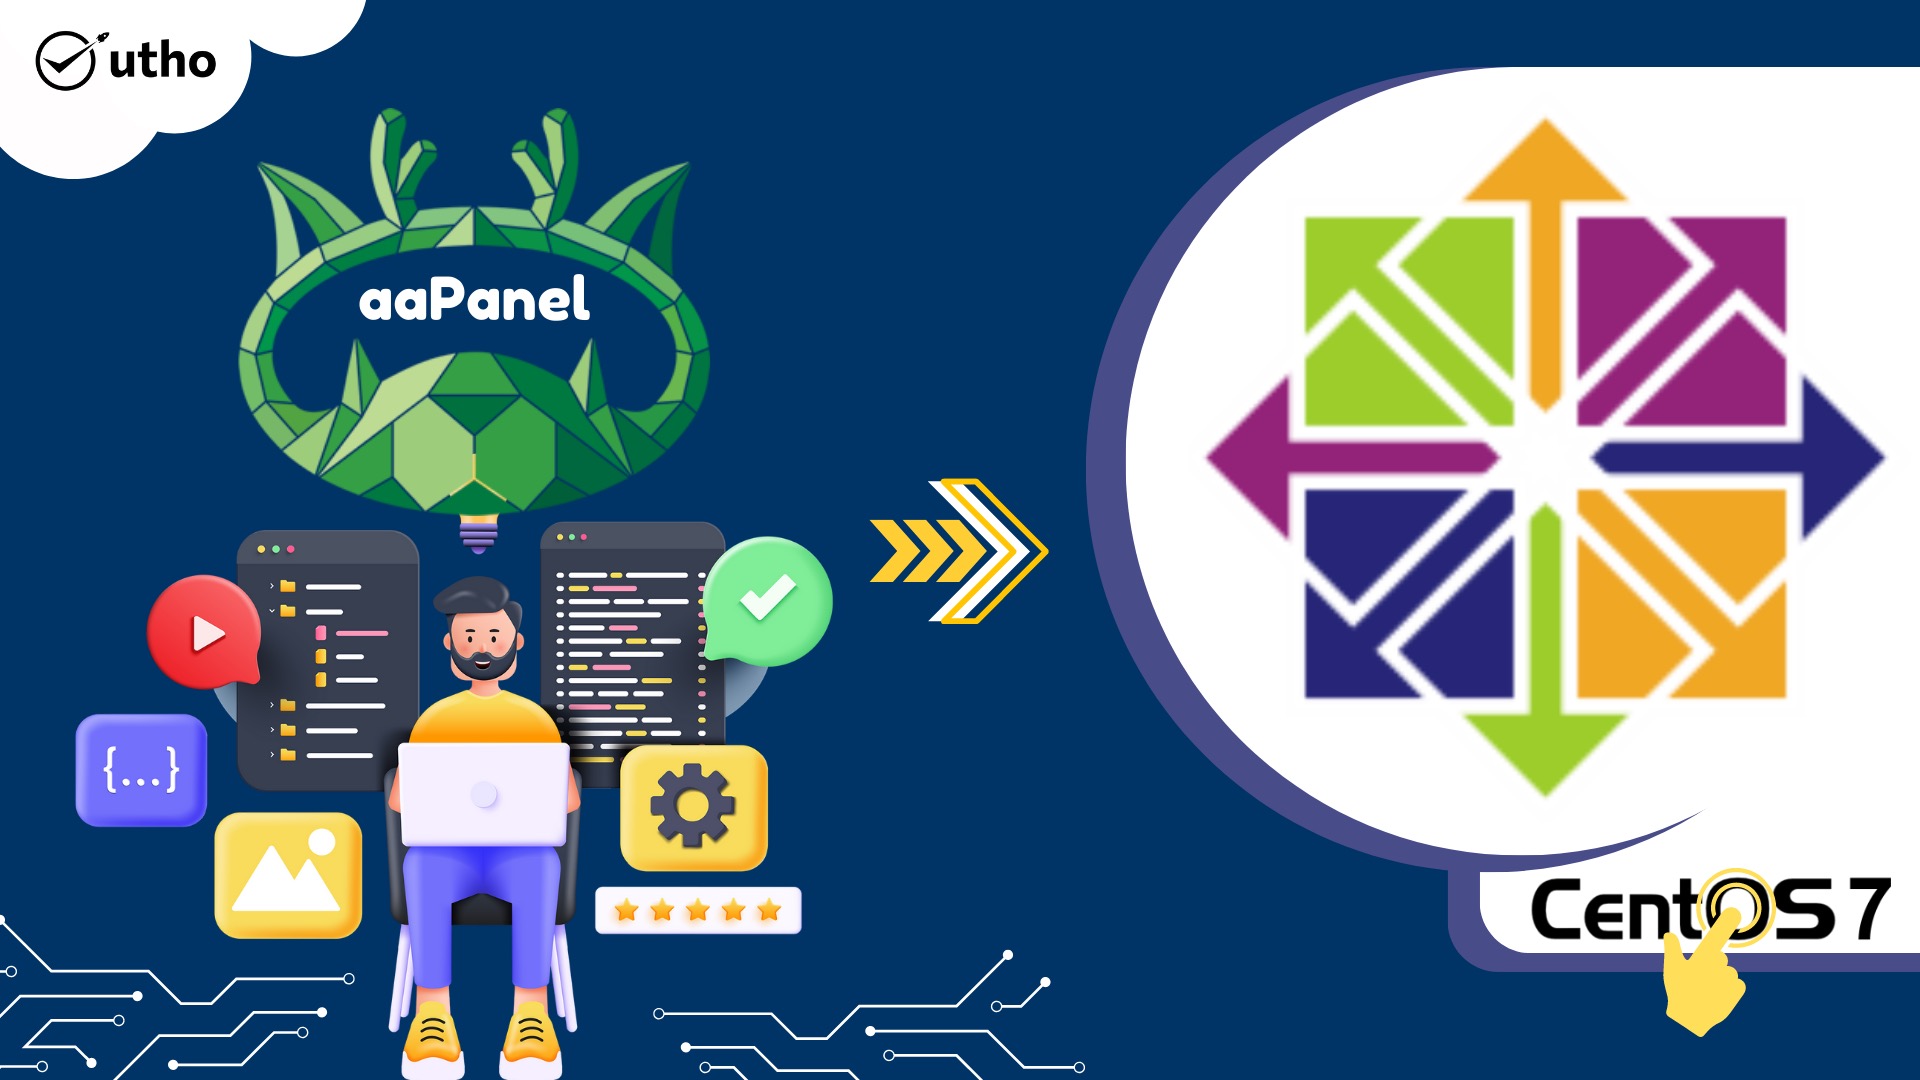 How to install aaPanel on Centos 7 by one click